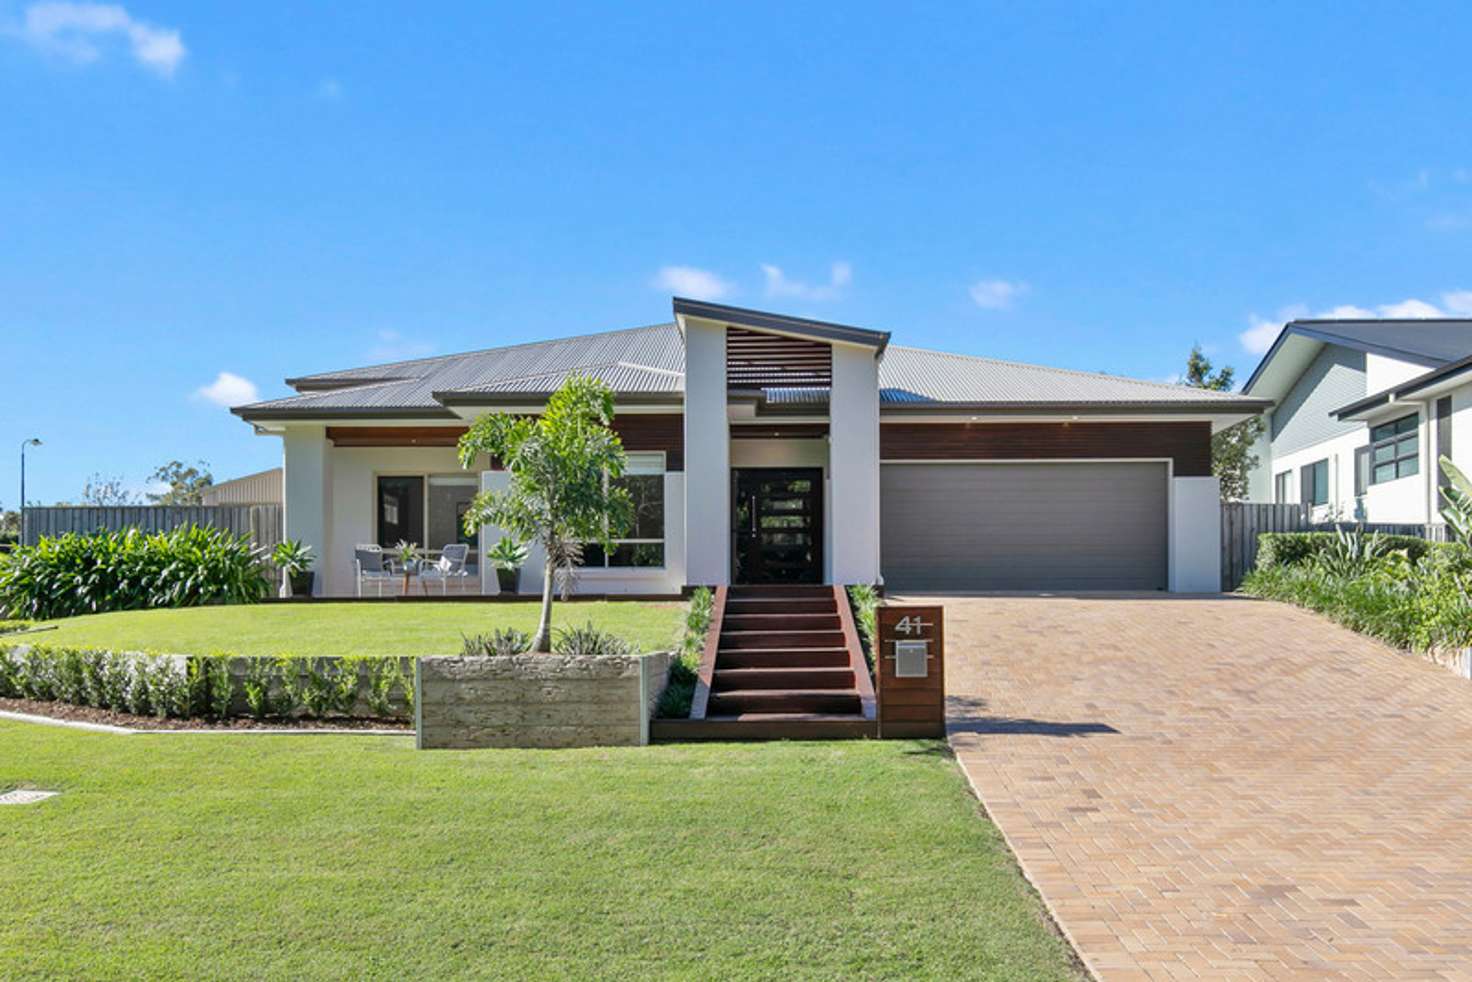 Main view of Homely house listing, 41 Vineyard Drive, Mount Cotton QLD 4165